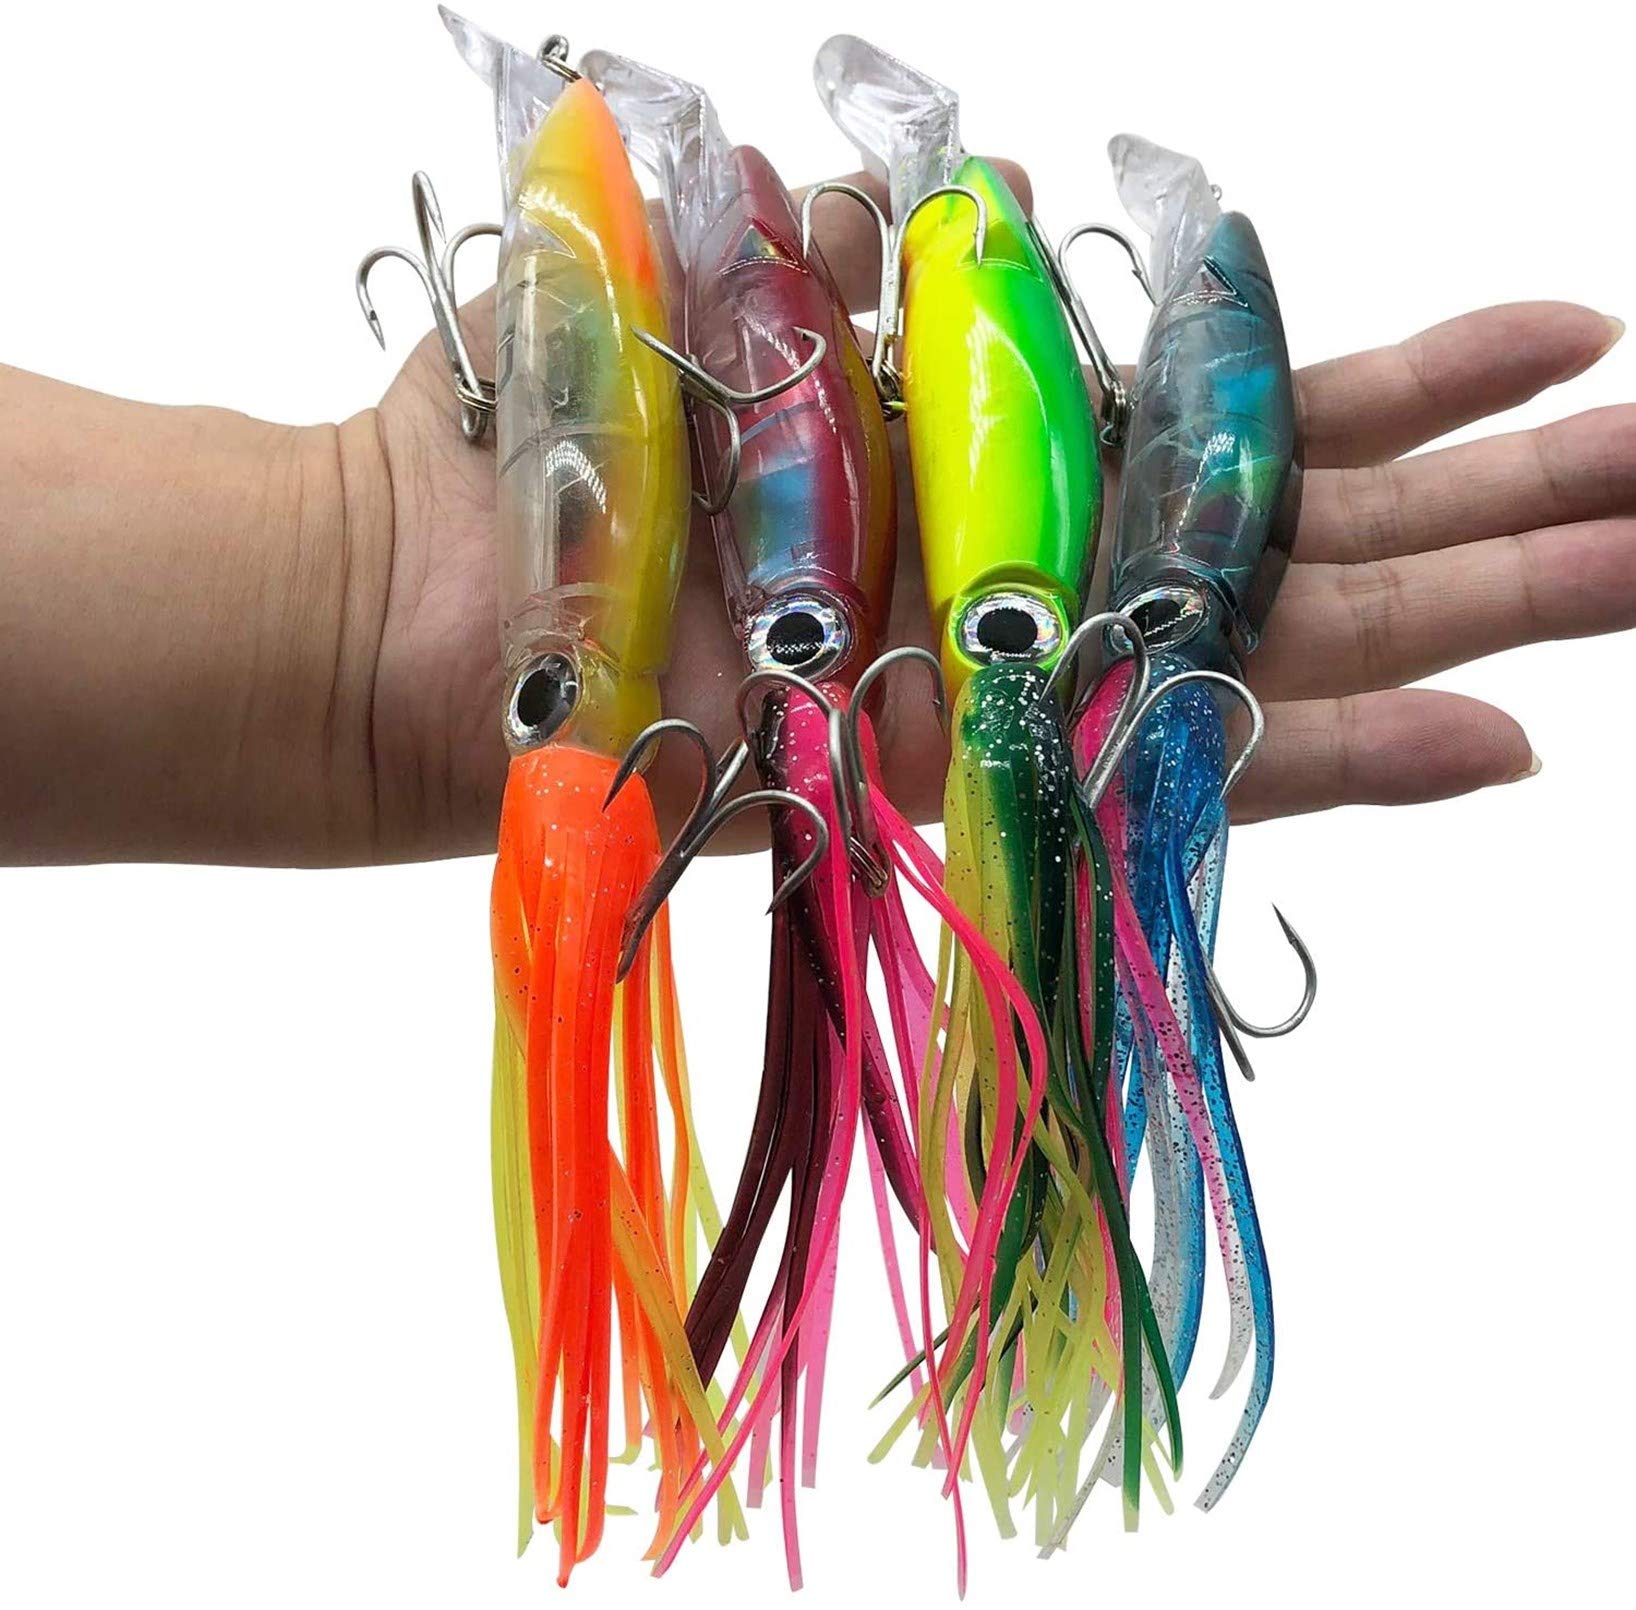 DAMIDEL 4 Pcs Large Simulation Squid Fishing Lures Bait Kit,3D Holographic  Eyes,Built-in Multicolored